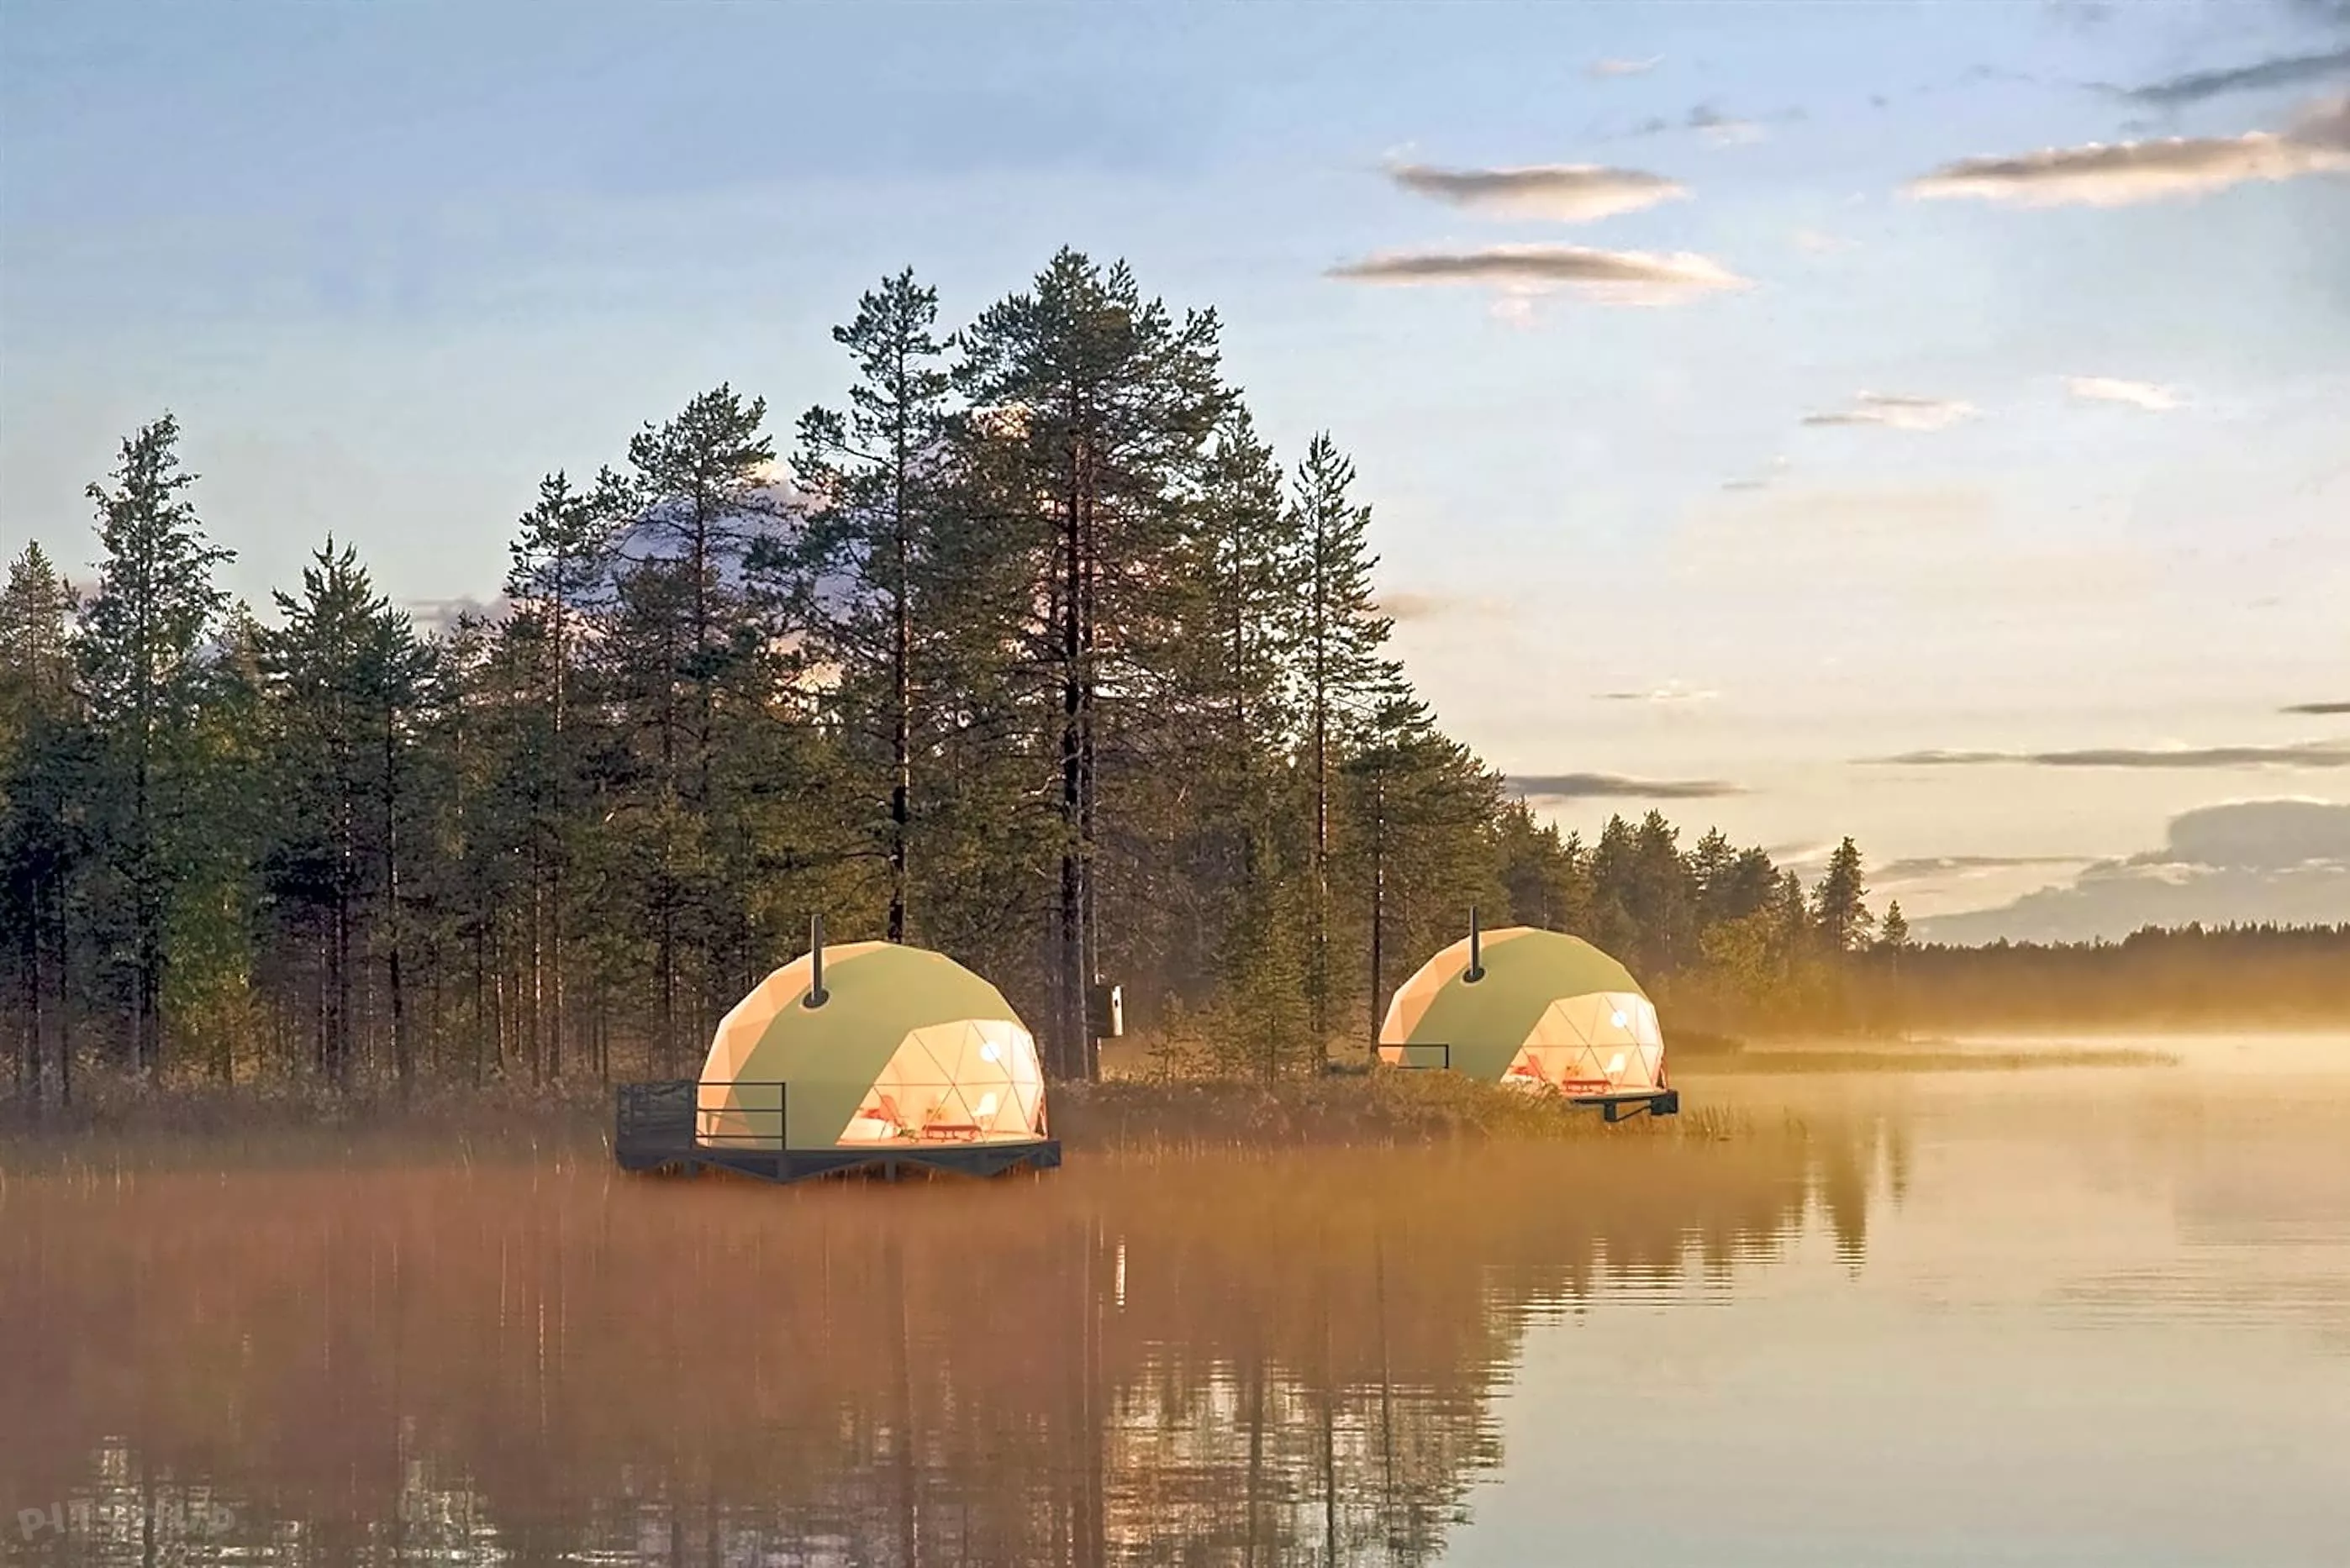 Toras-Sieppi in Finland, Europe | Lakes - Rated 0.8